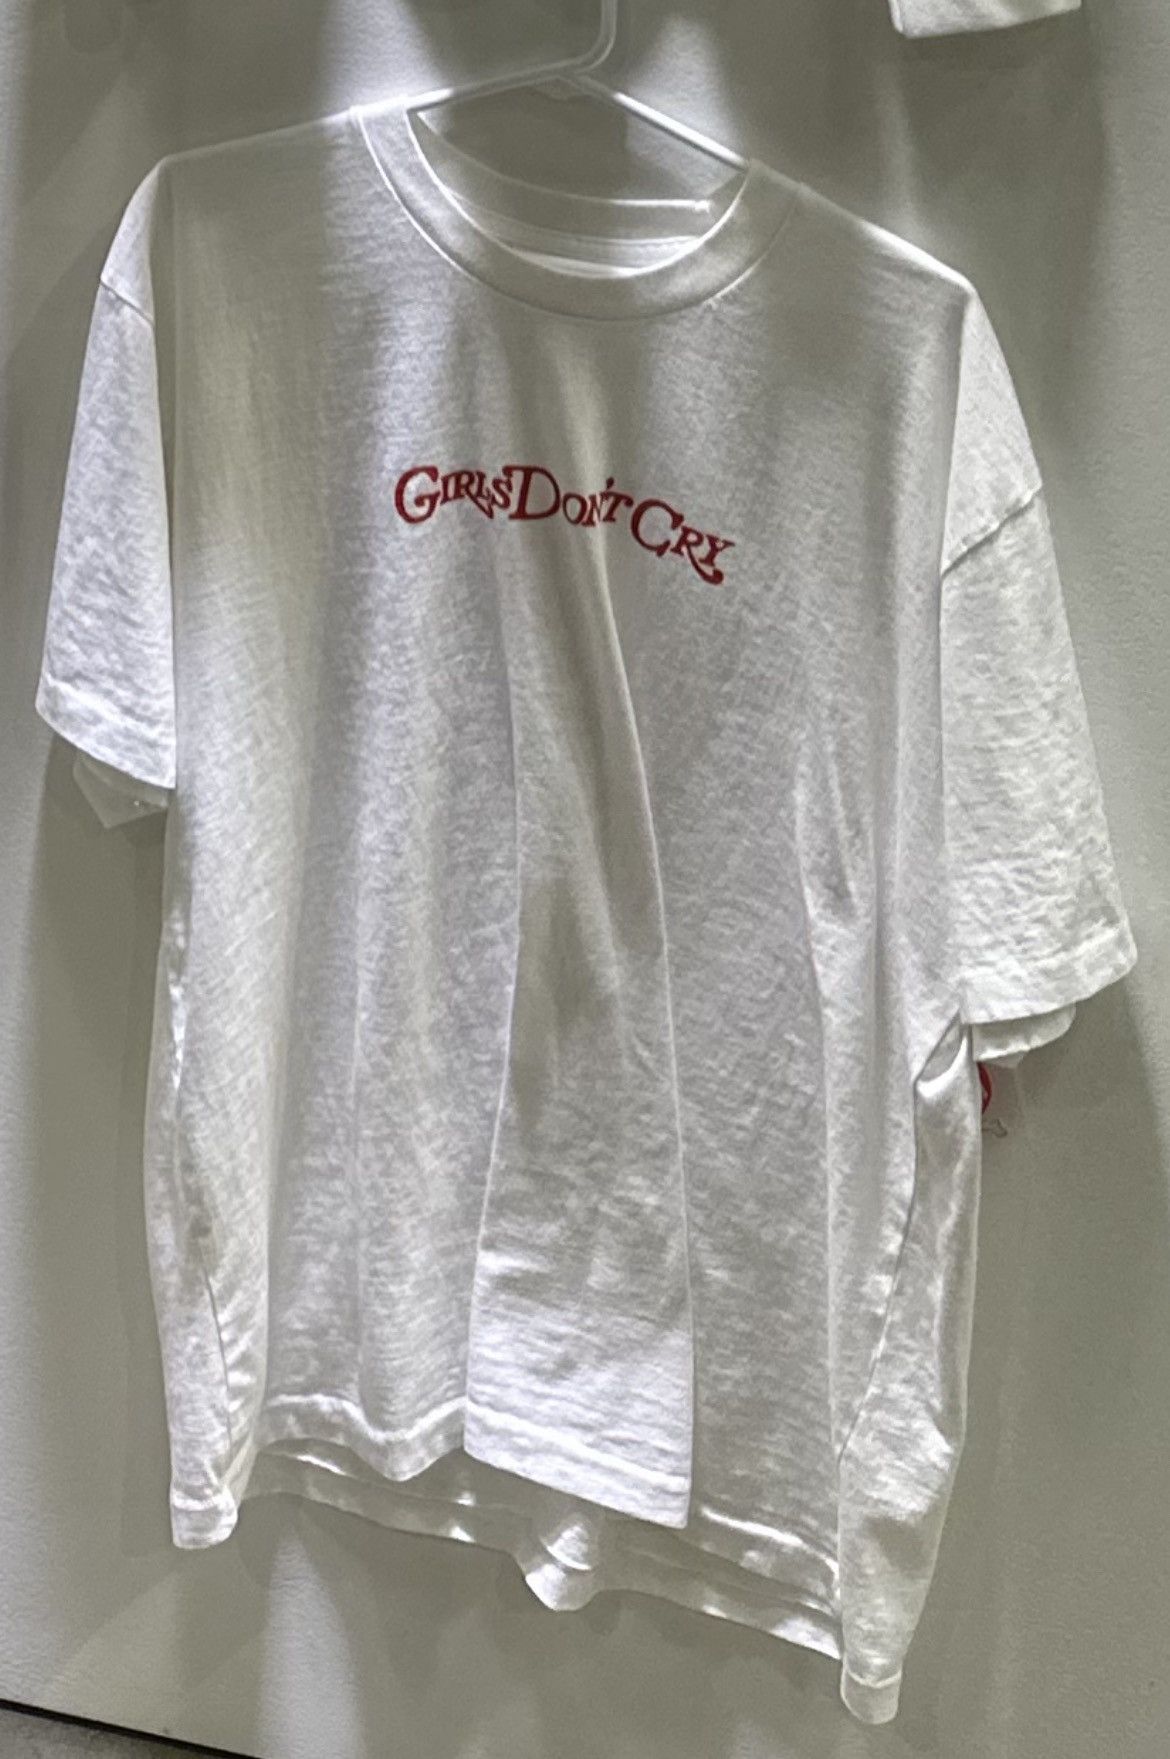 Human Made x Girls Don't Cry ComplexCon Exclusive T-Shirt White